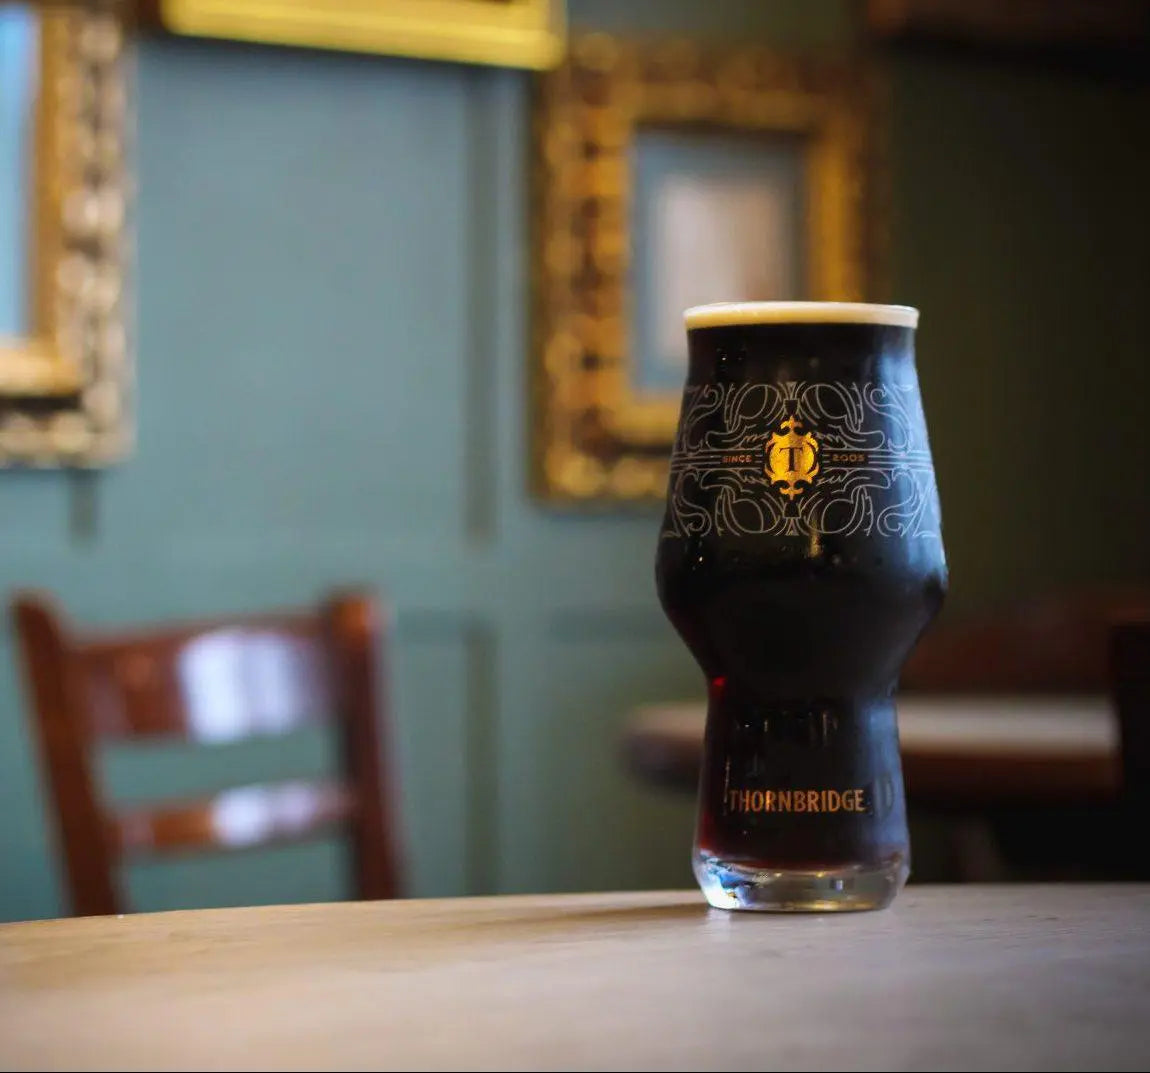 A craftmaster glass full of market porter in the greystones pub